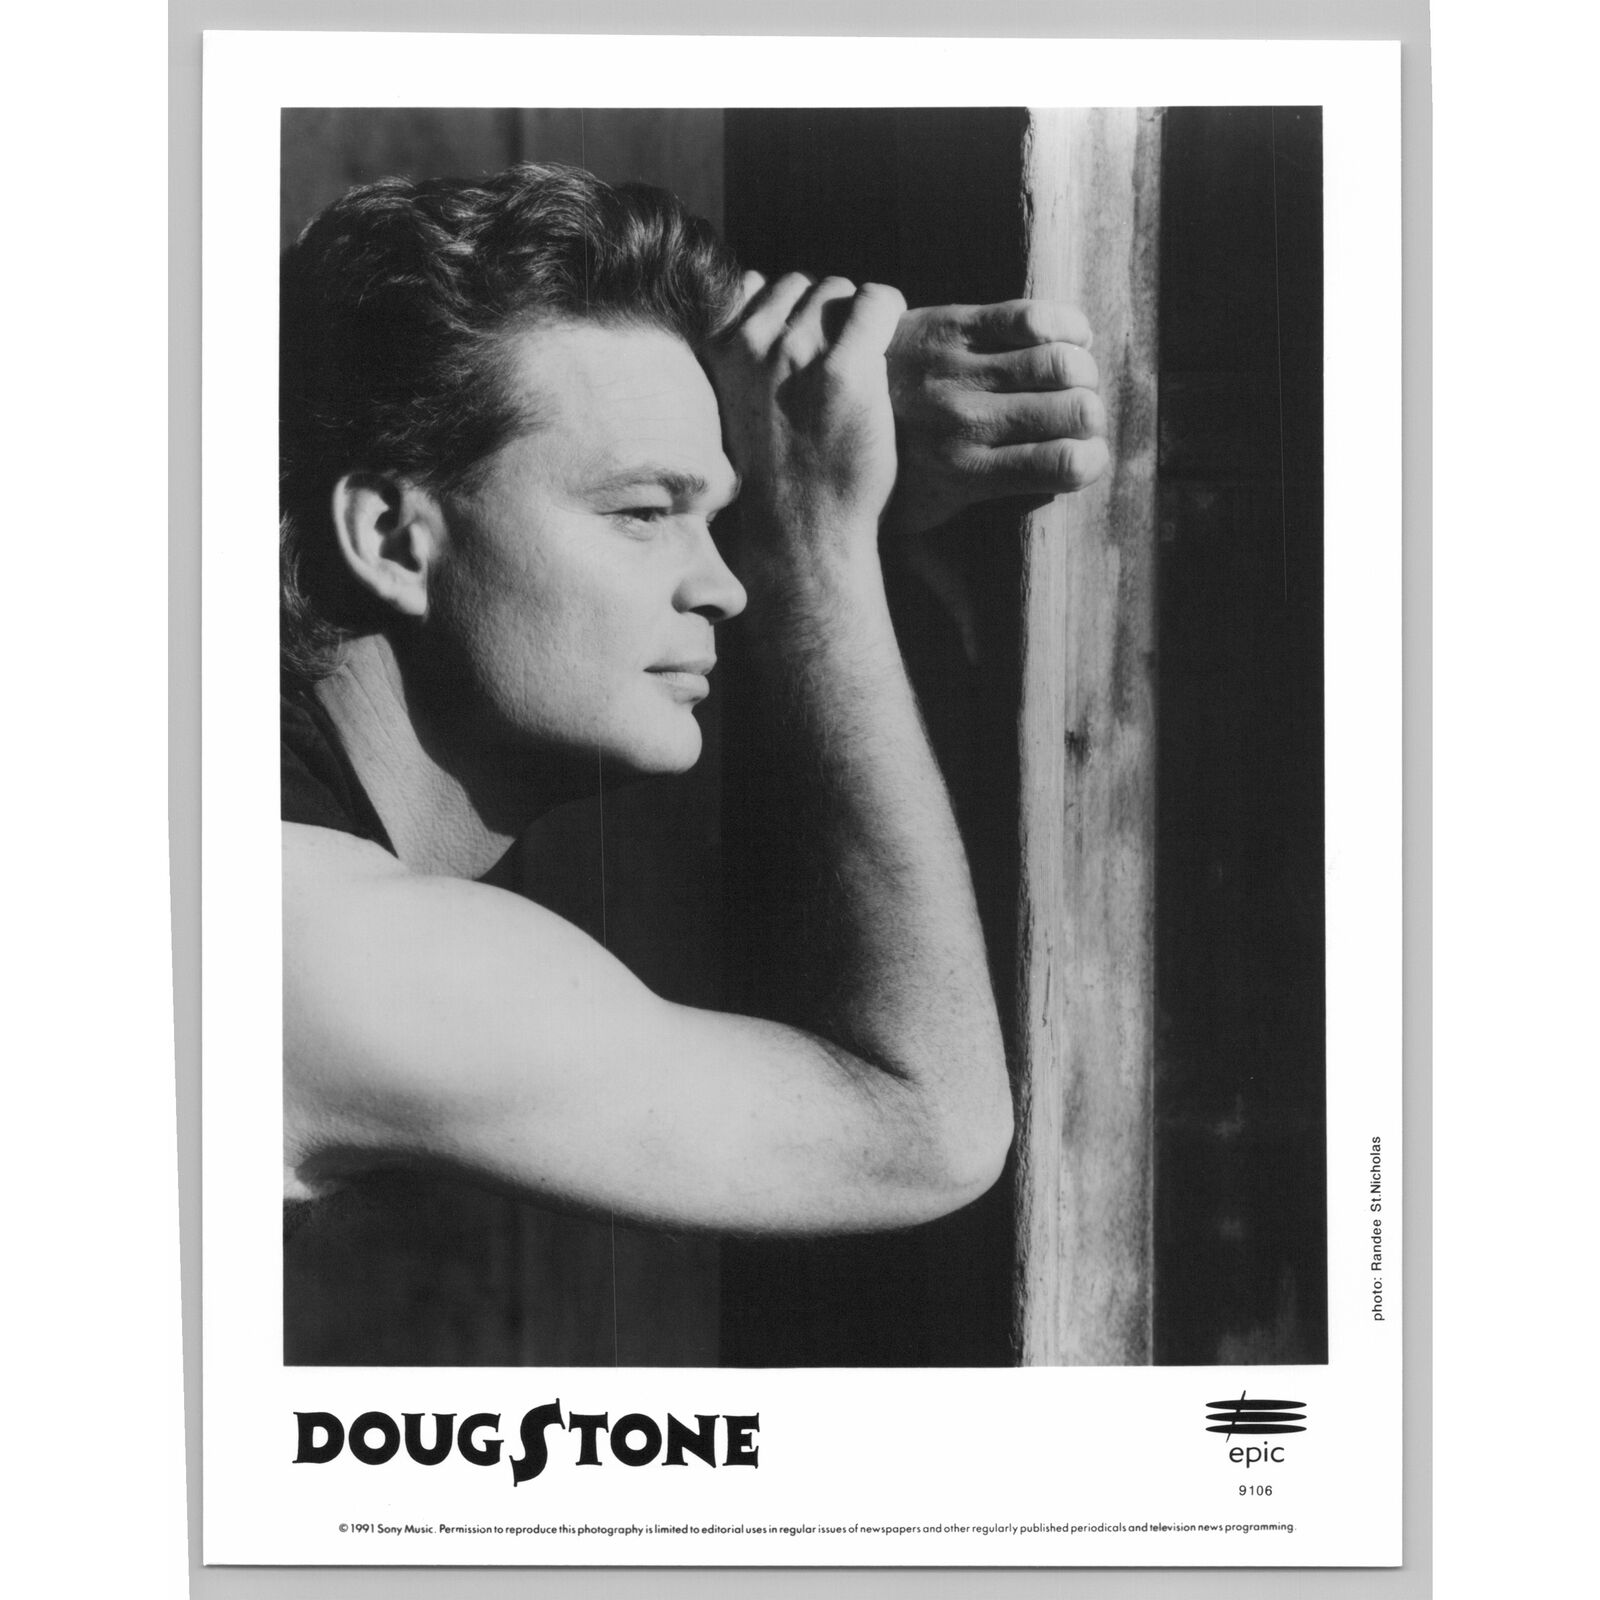 Doug Stone American Country Singer Songwriter 80s-90s Glossy Music Press Photo